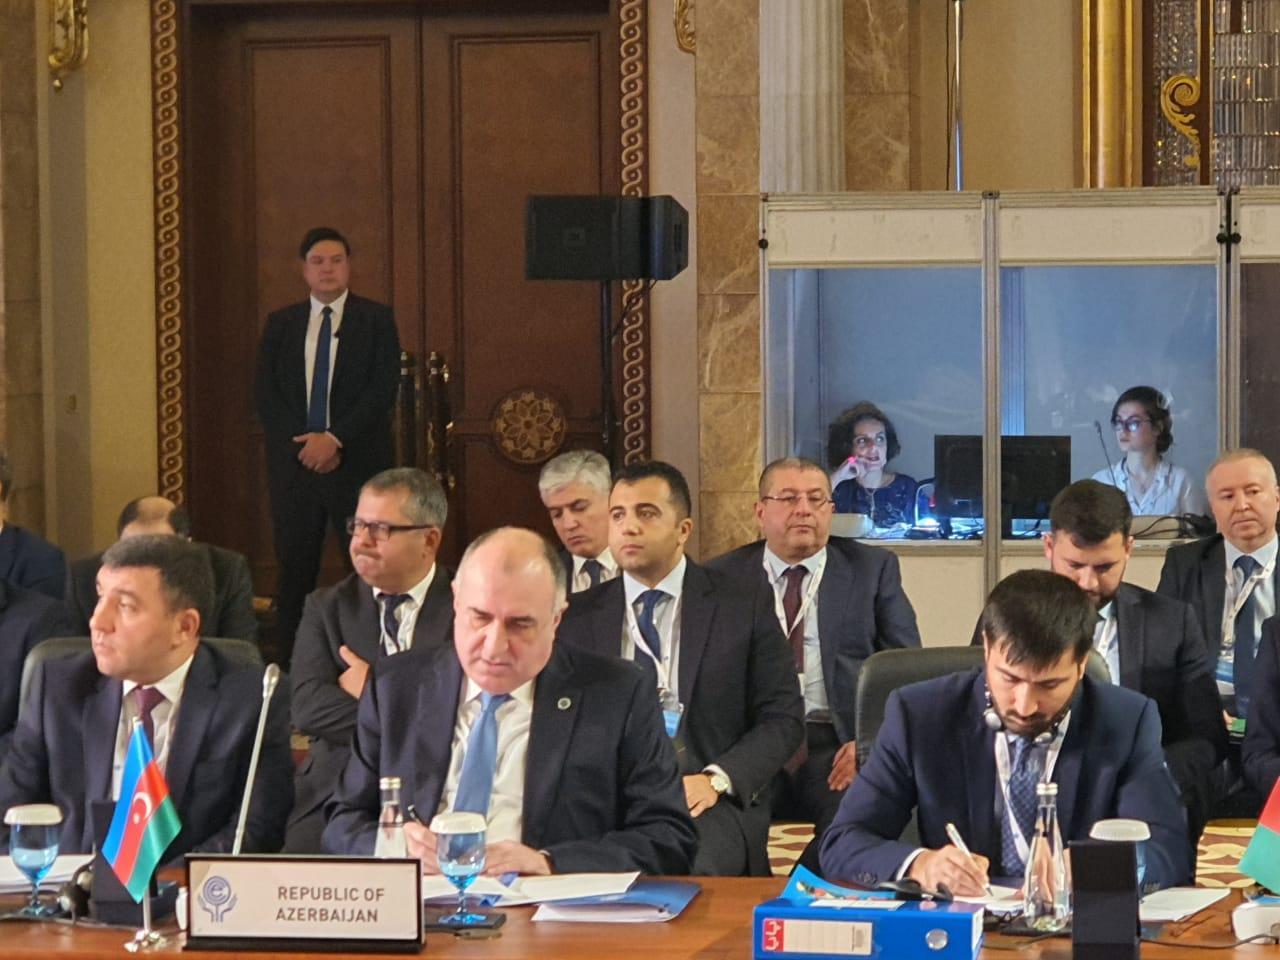 Mammadyarov: Azerbaijan has always provided its support to various economic cooperation efforts in region and beyond [PHOTO]